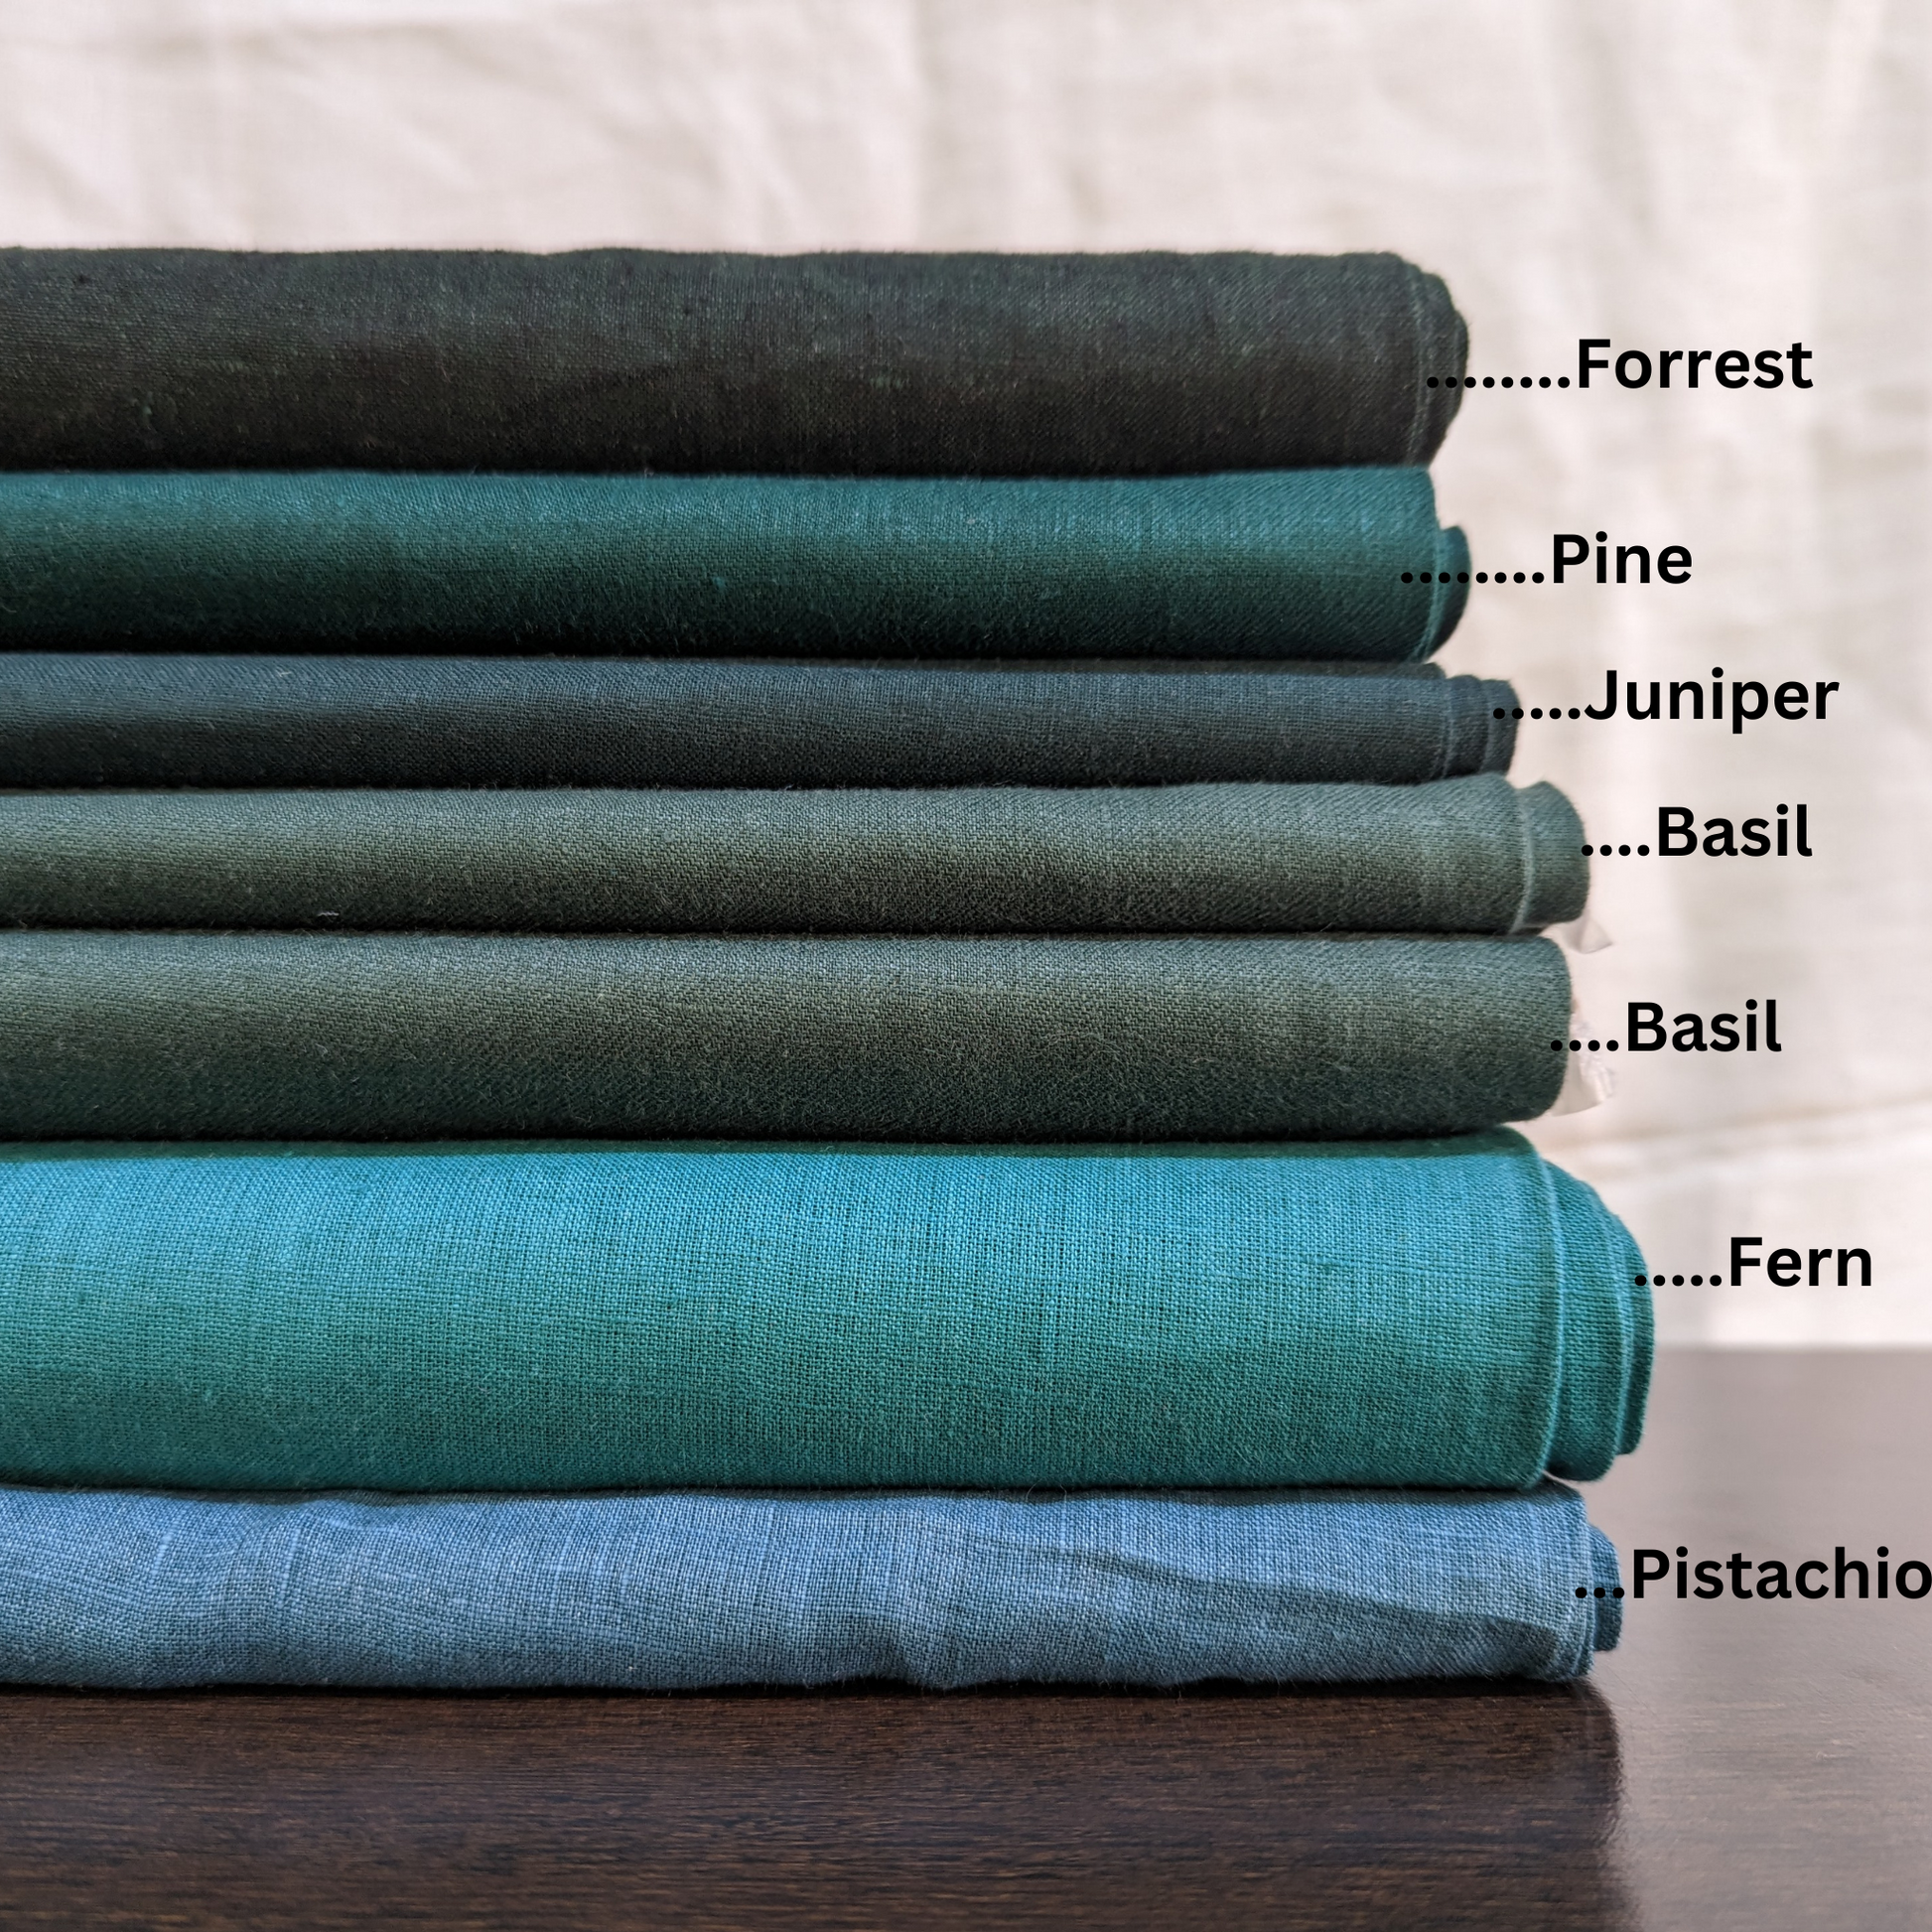 Forrest Greens: Versatile Pure Linen Fabric, Used for Shirts, Tops, Dresses, Palazzos - OrganoLinen